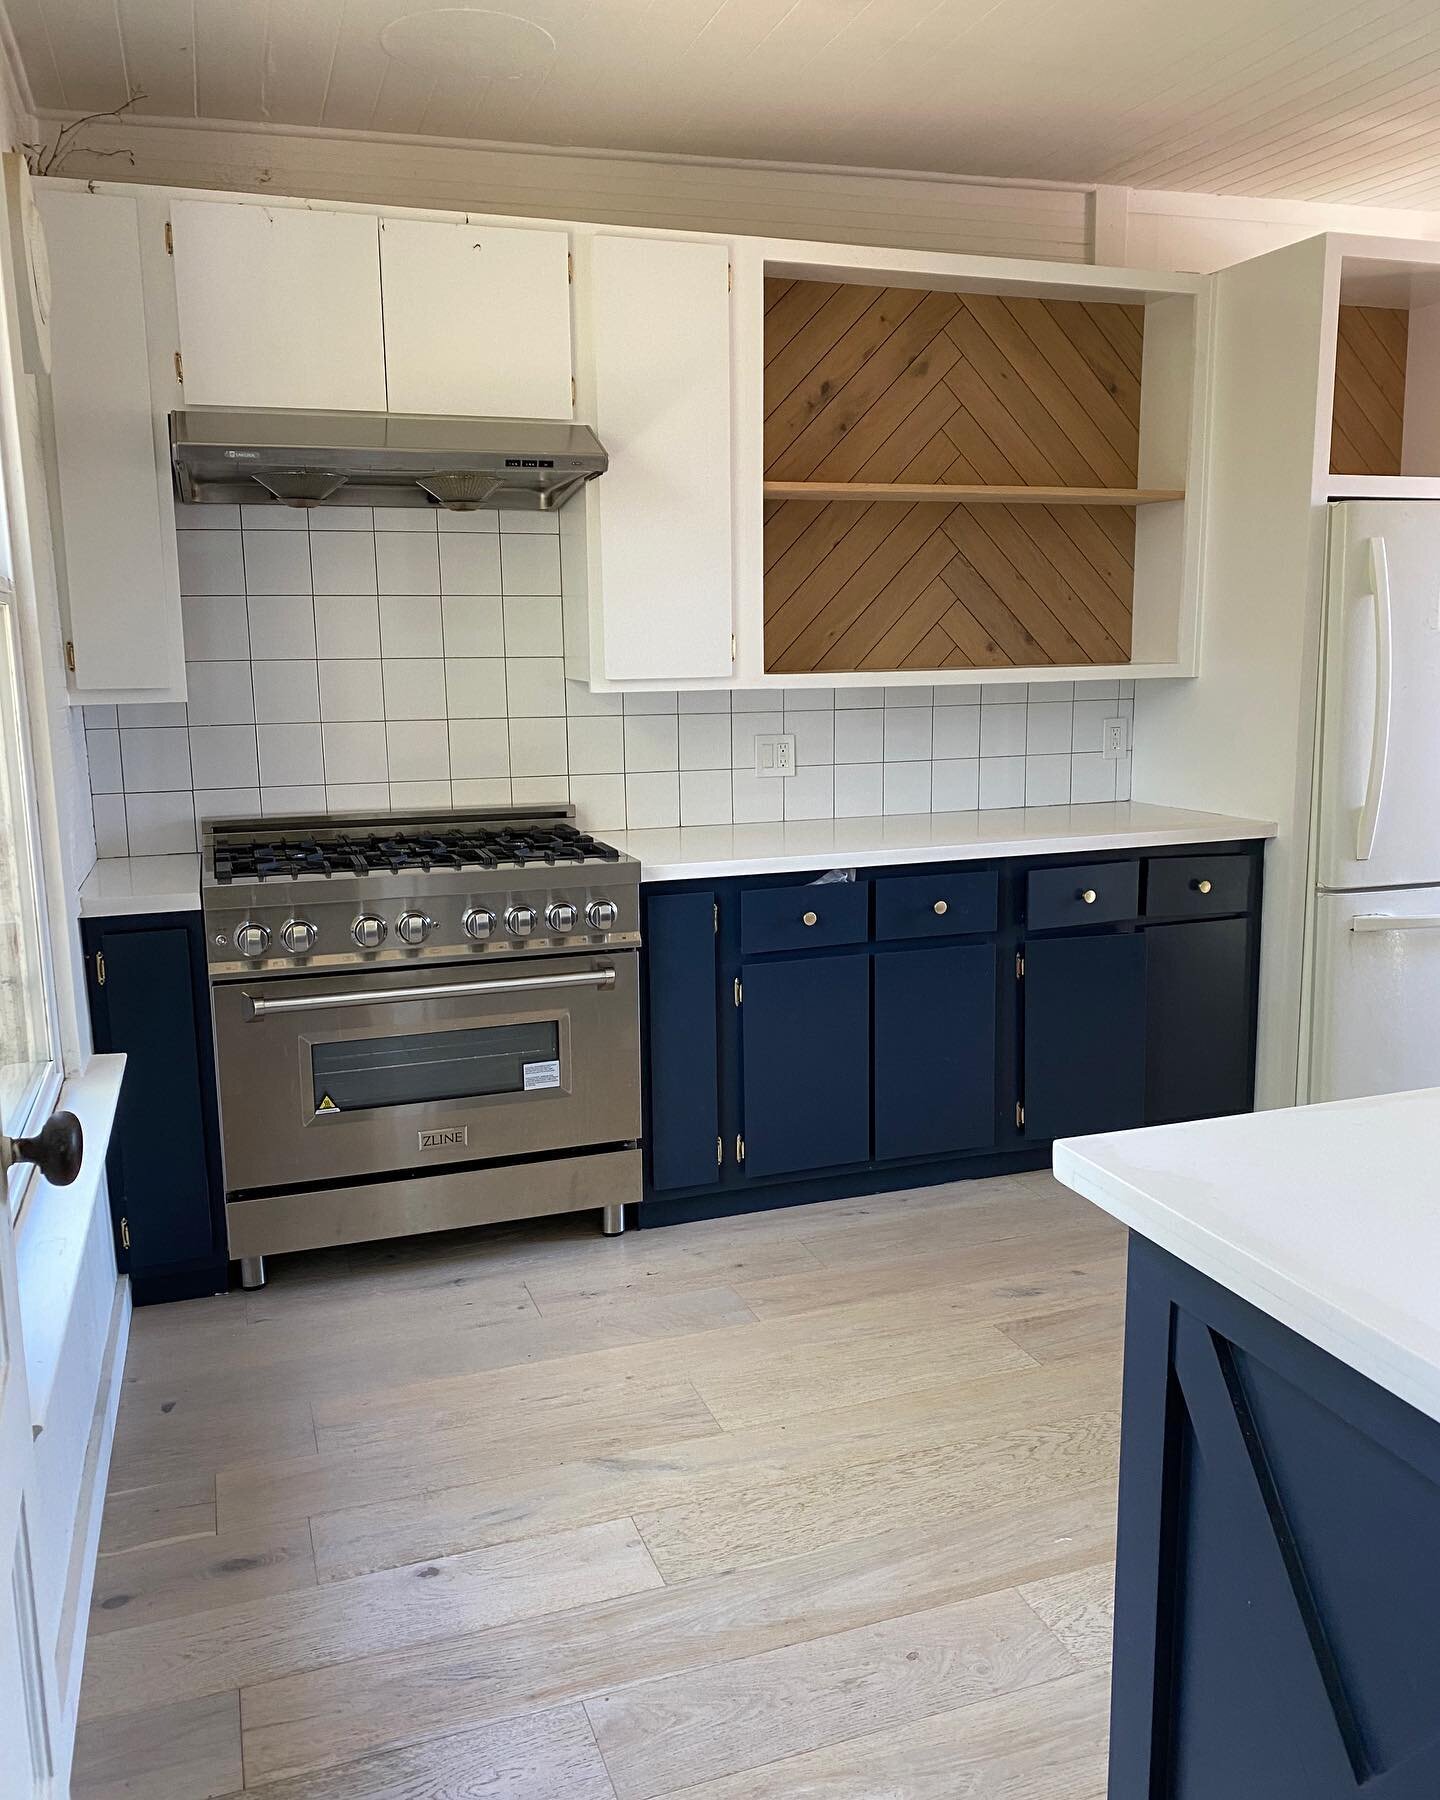 HOUSE FOR RENT IN TOMALES

3 bed - 2 bath historical two level home for rent. available Nov 1st. 3,500 plus utilities. Recently fully renovated. Chefs kitchen, back yard, wood floors, new roof, in unit washer &amp; dryer. Air &amp; Heat, wood burning